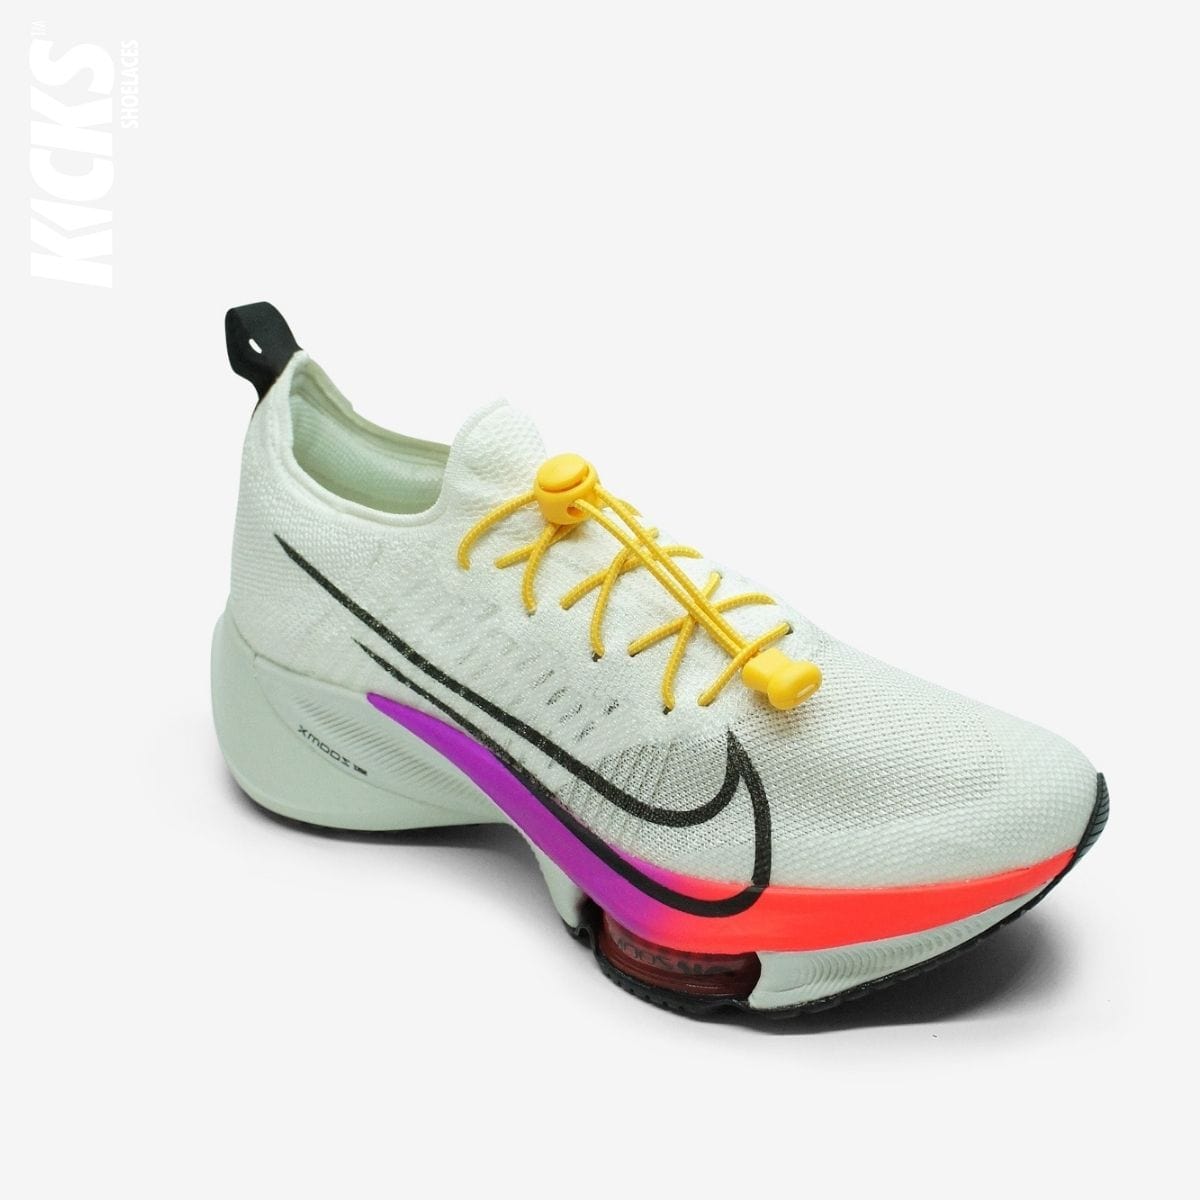 quick-laces-with-golden-yellow-elastic-no-tie-shoelaces-on-nike-running-shoe-by-kicks-shoelaces